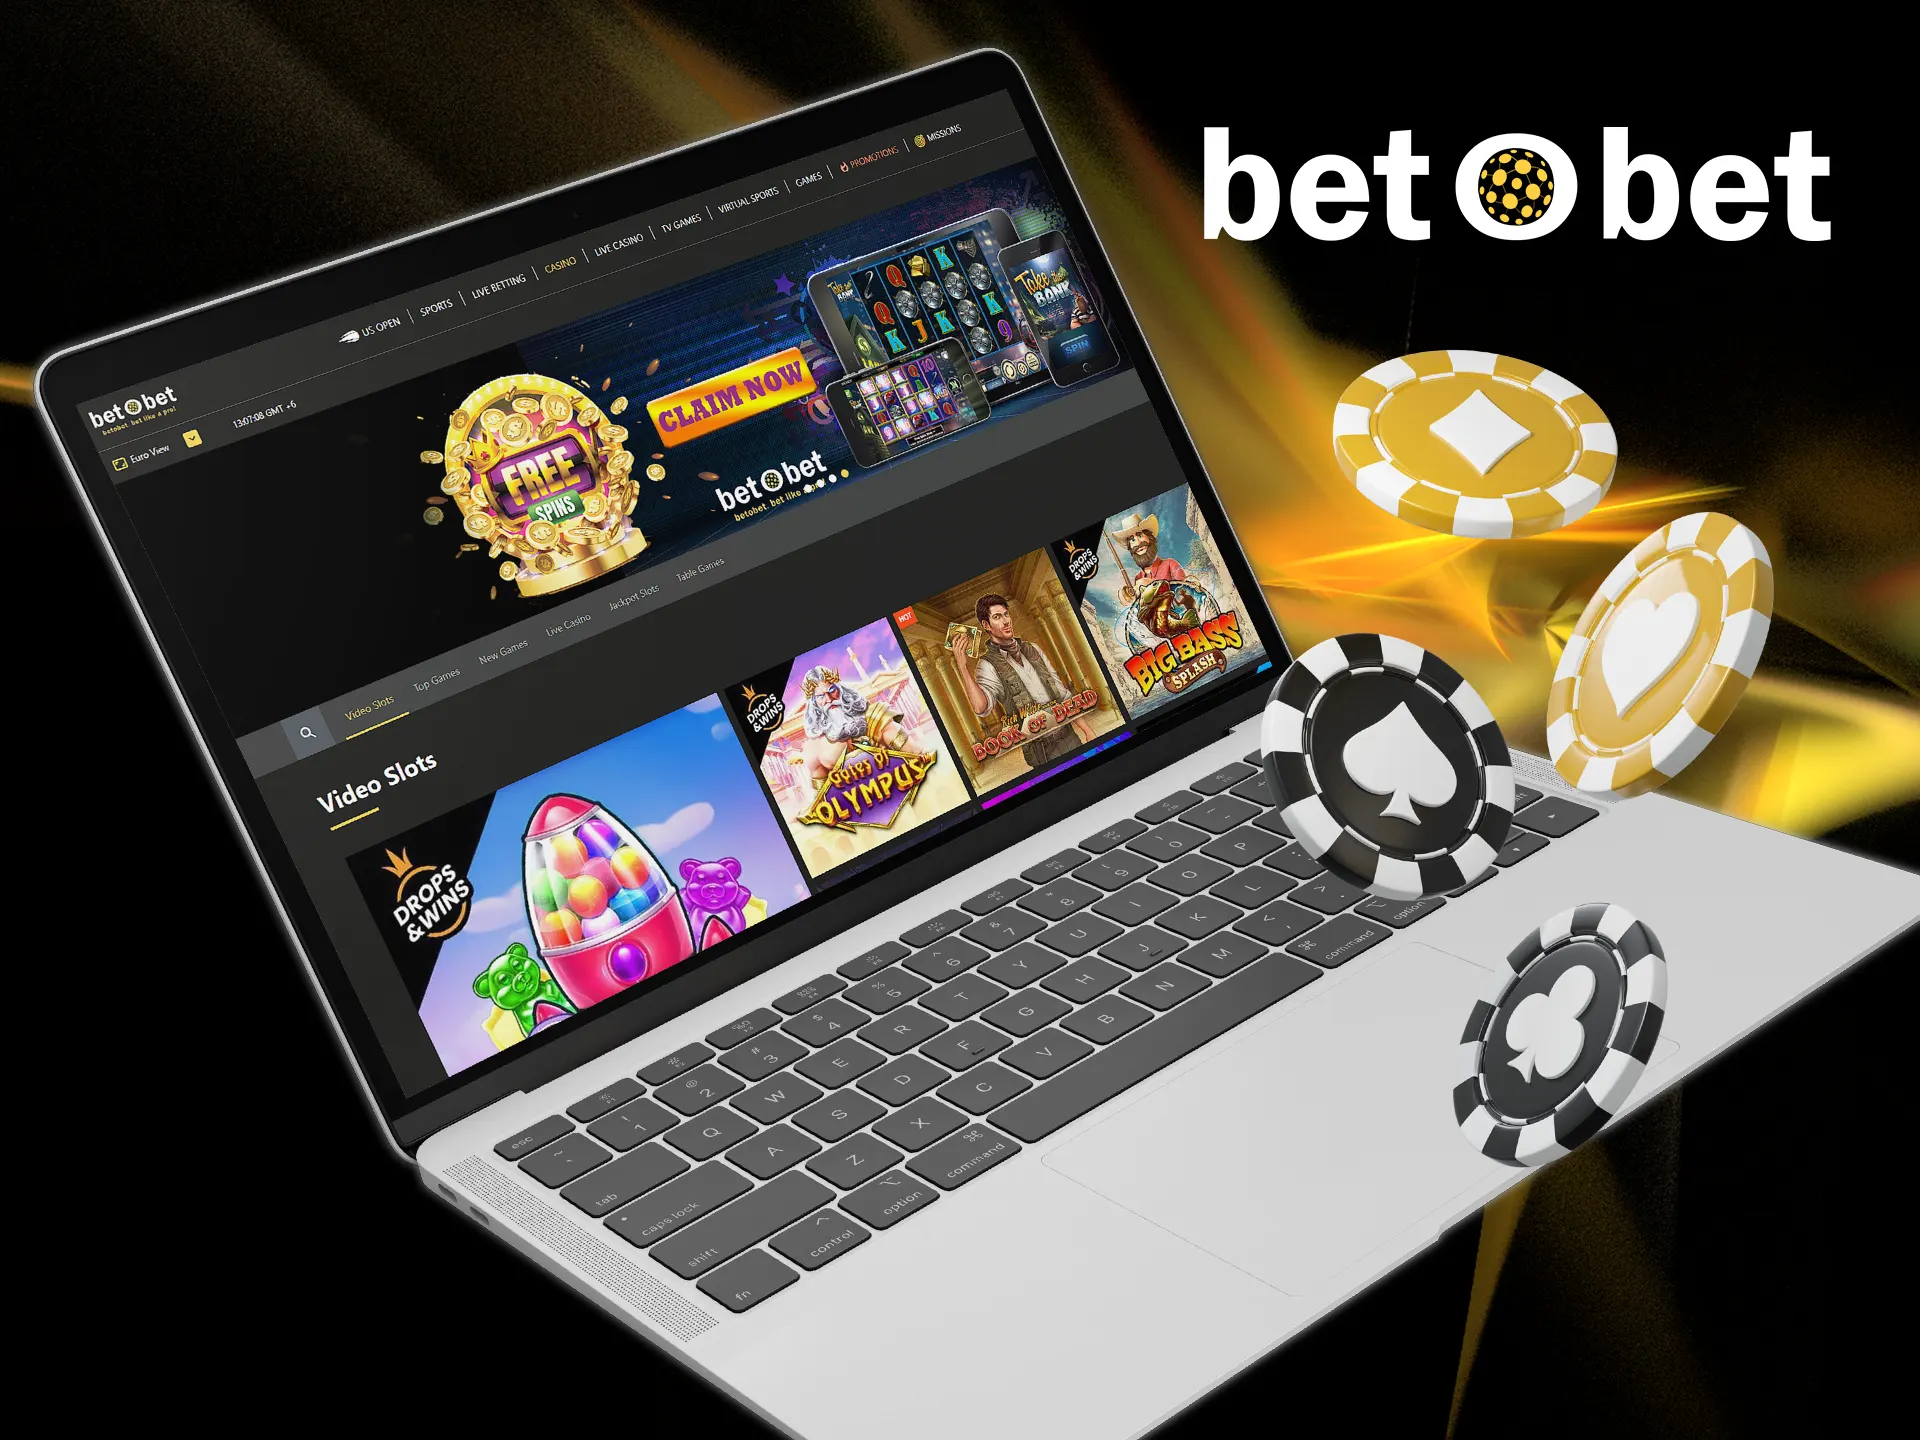 Visit the Betobet website and start playing casino games.